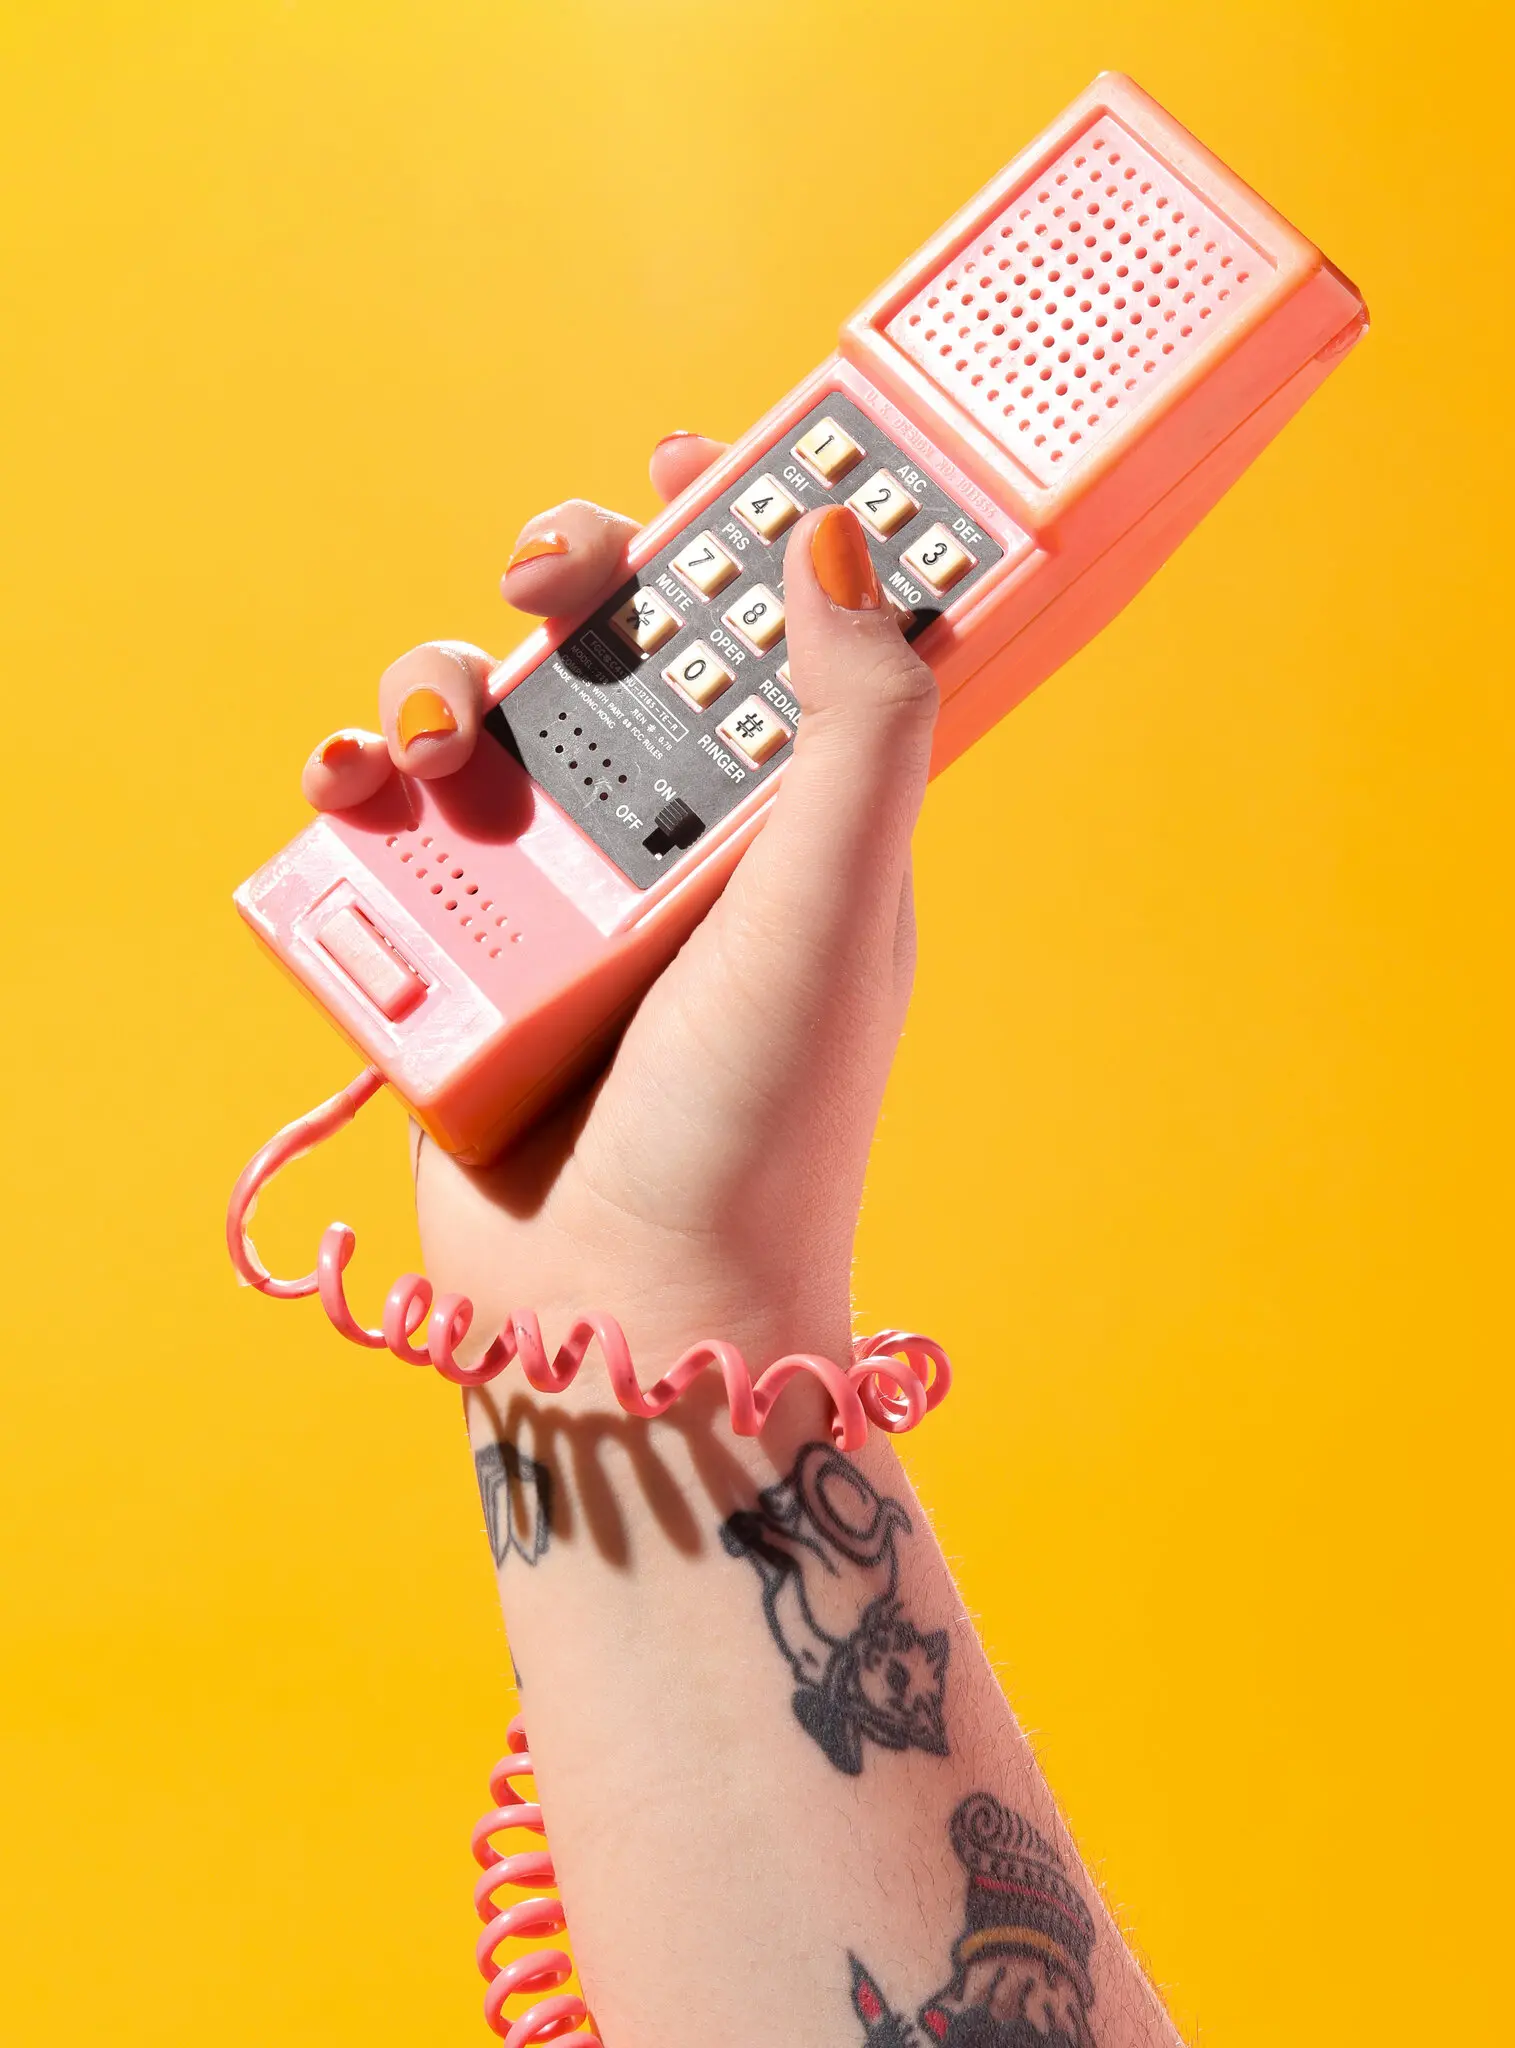 Ms. Karr’s orange phone was made as a promotional item for the 1986 film “Pretty in Pink.”